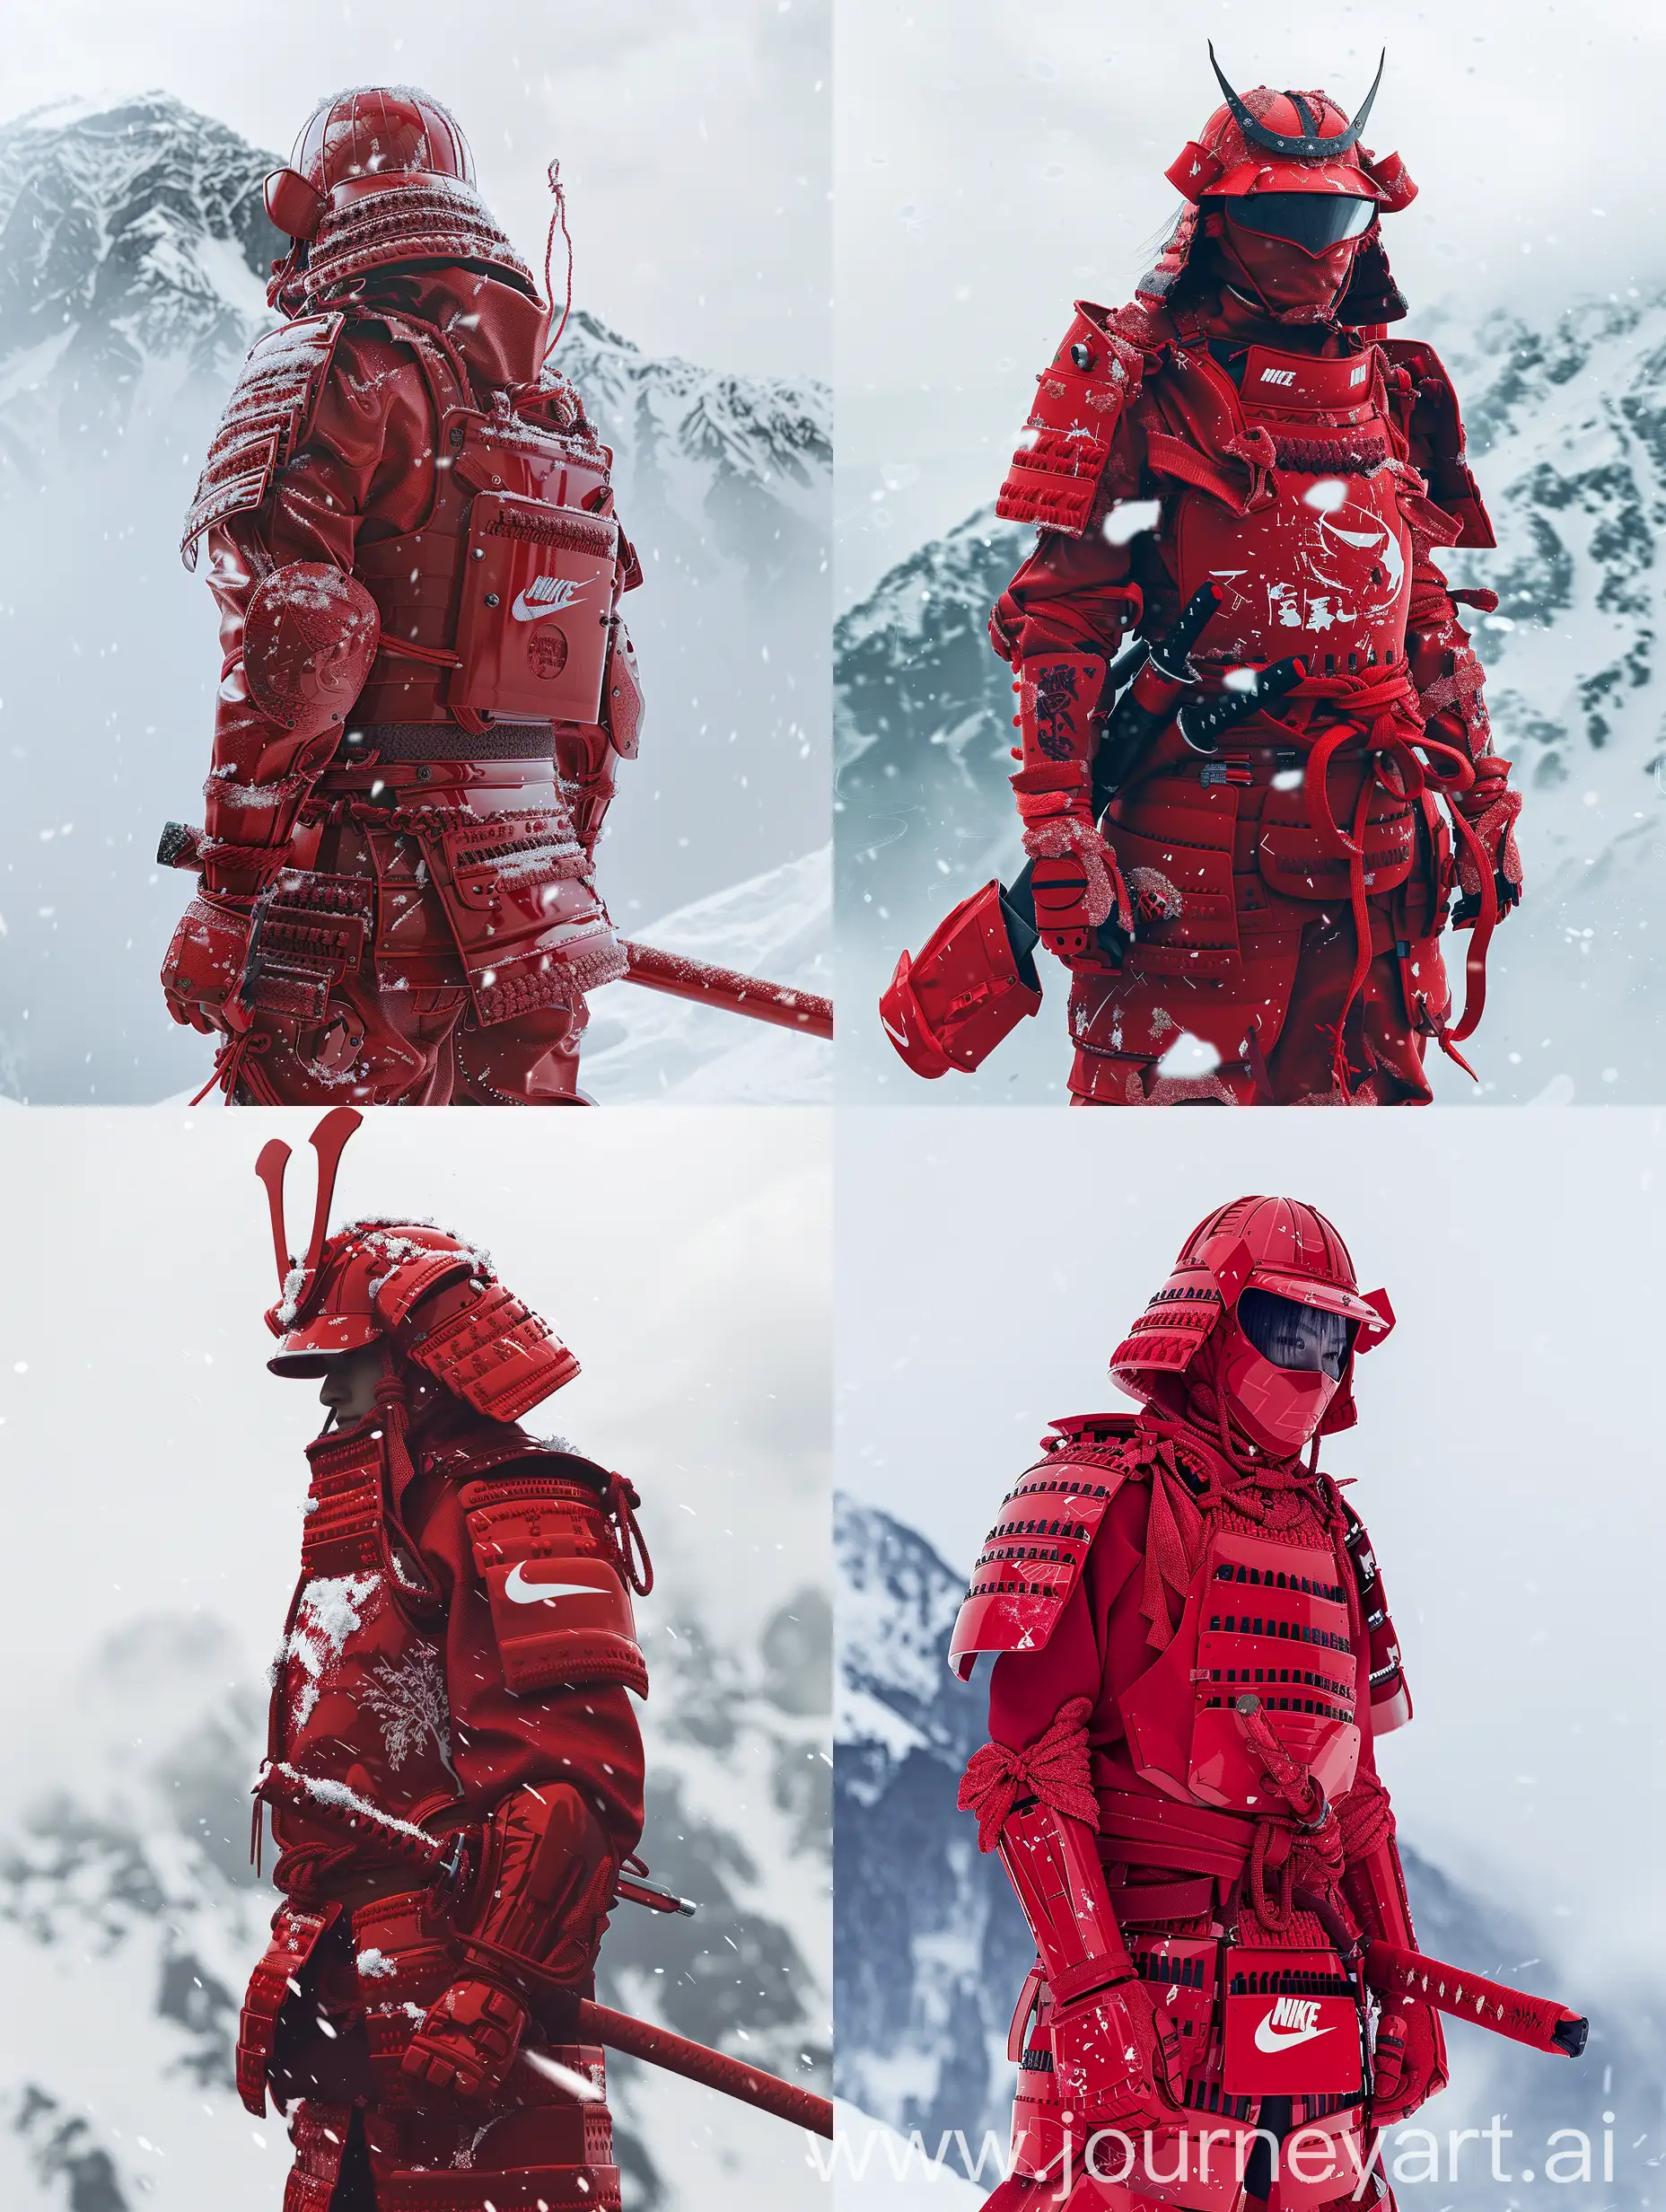 A person standing against a snowy mountainous background, wearing high detailed red samurai-style armor with Nike branding. The armor includes intricate detailing and protective gear, and the person holds a red sheathed sword. camera haze,Camera DSLR